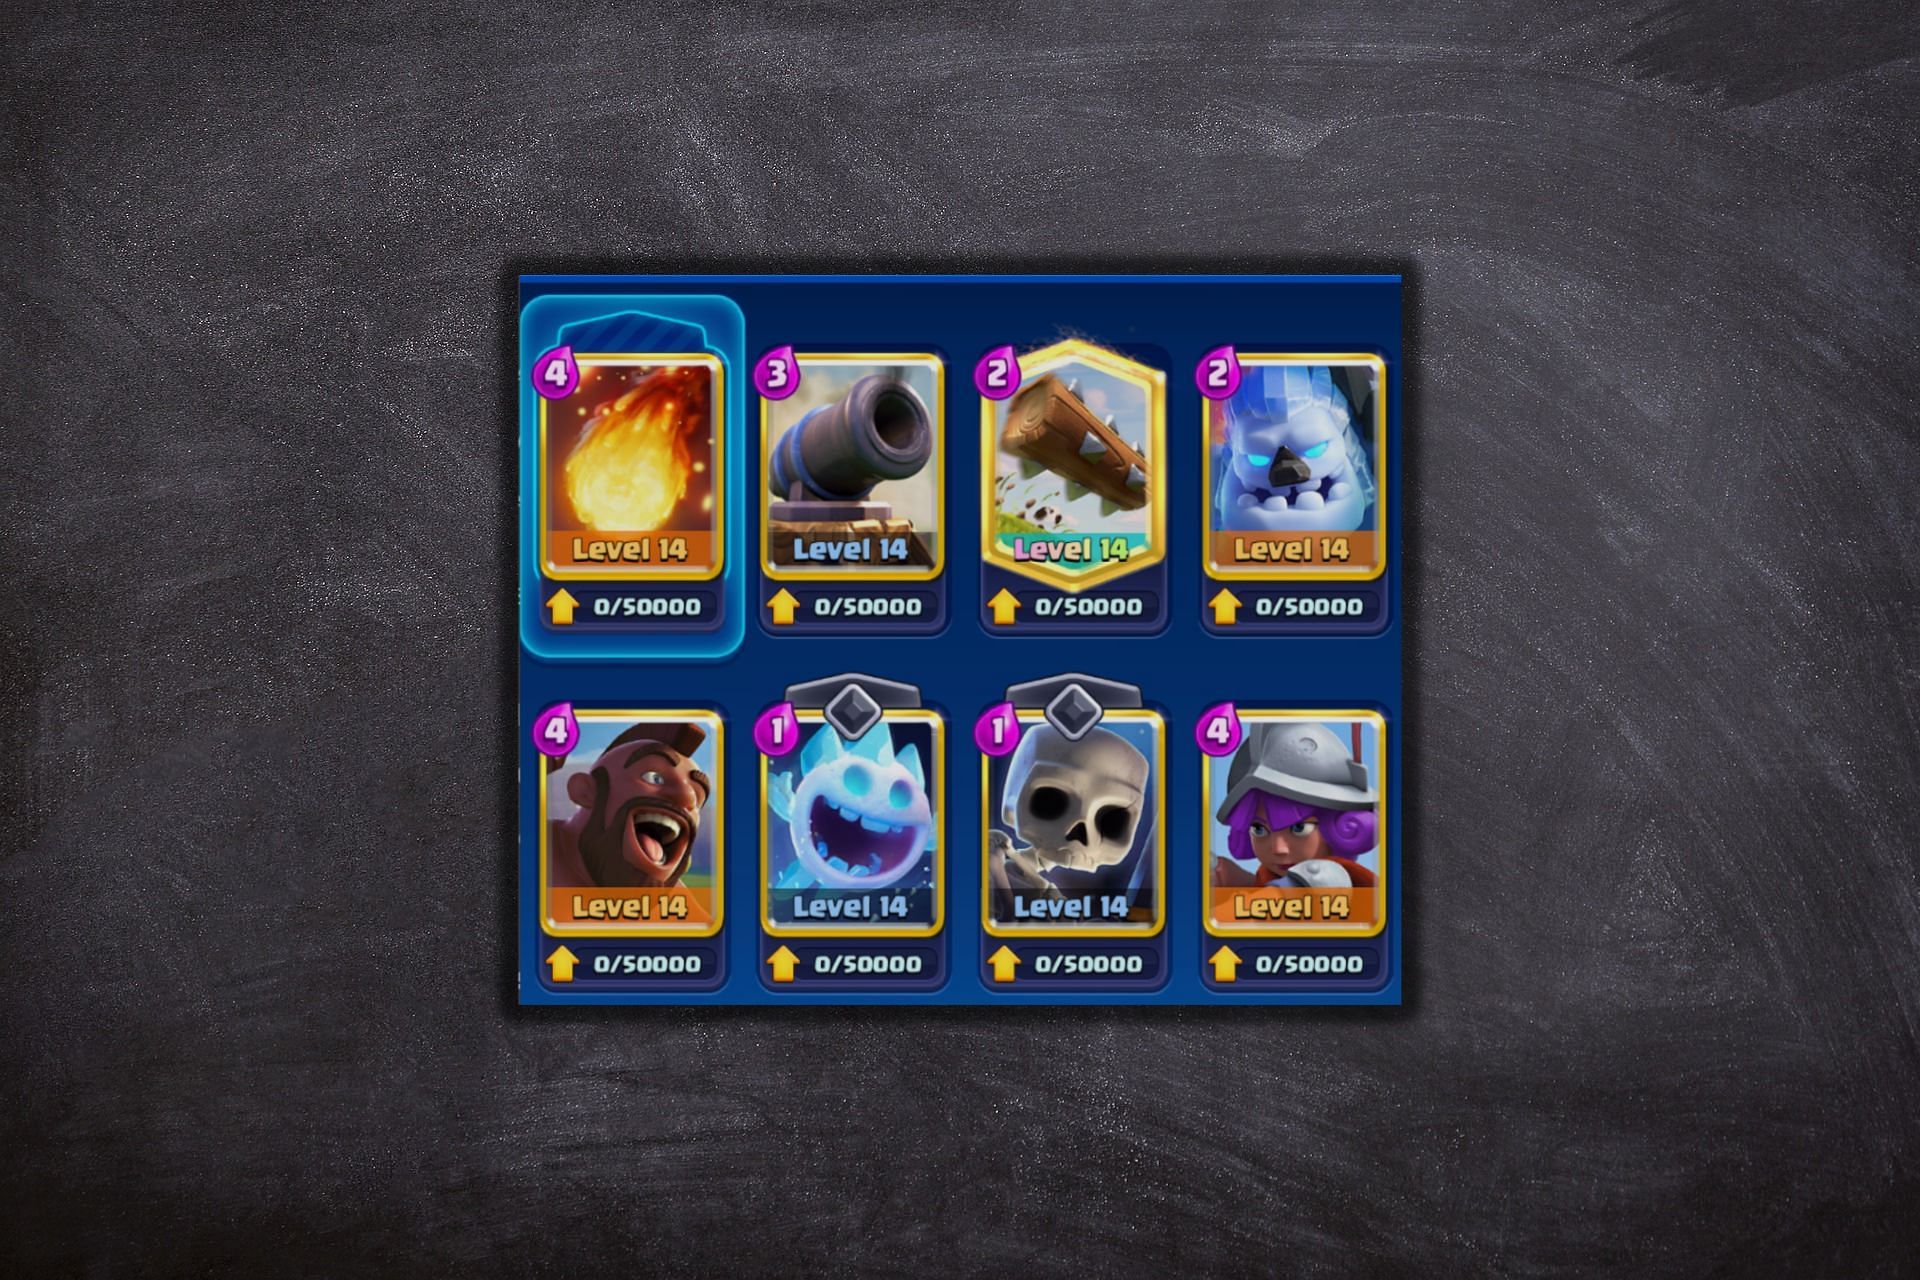 An example of a deck (Image via Supercell)